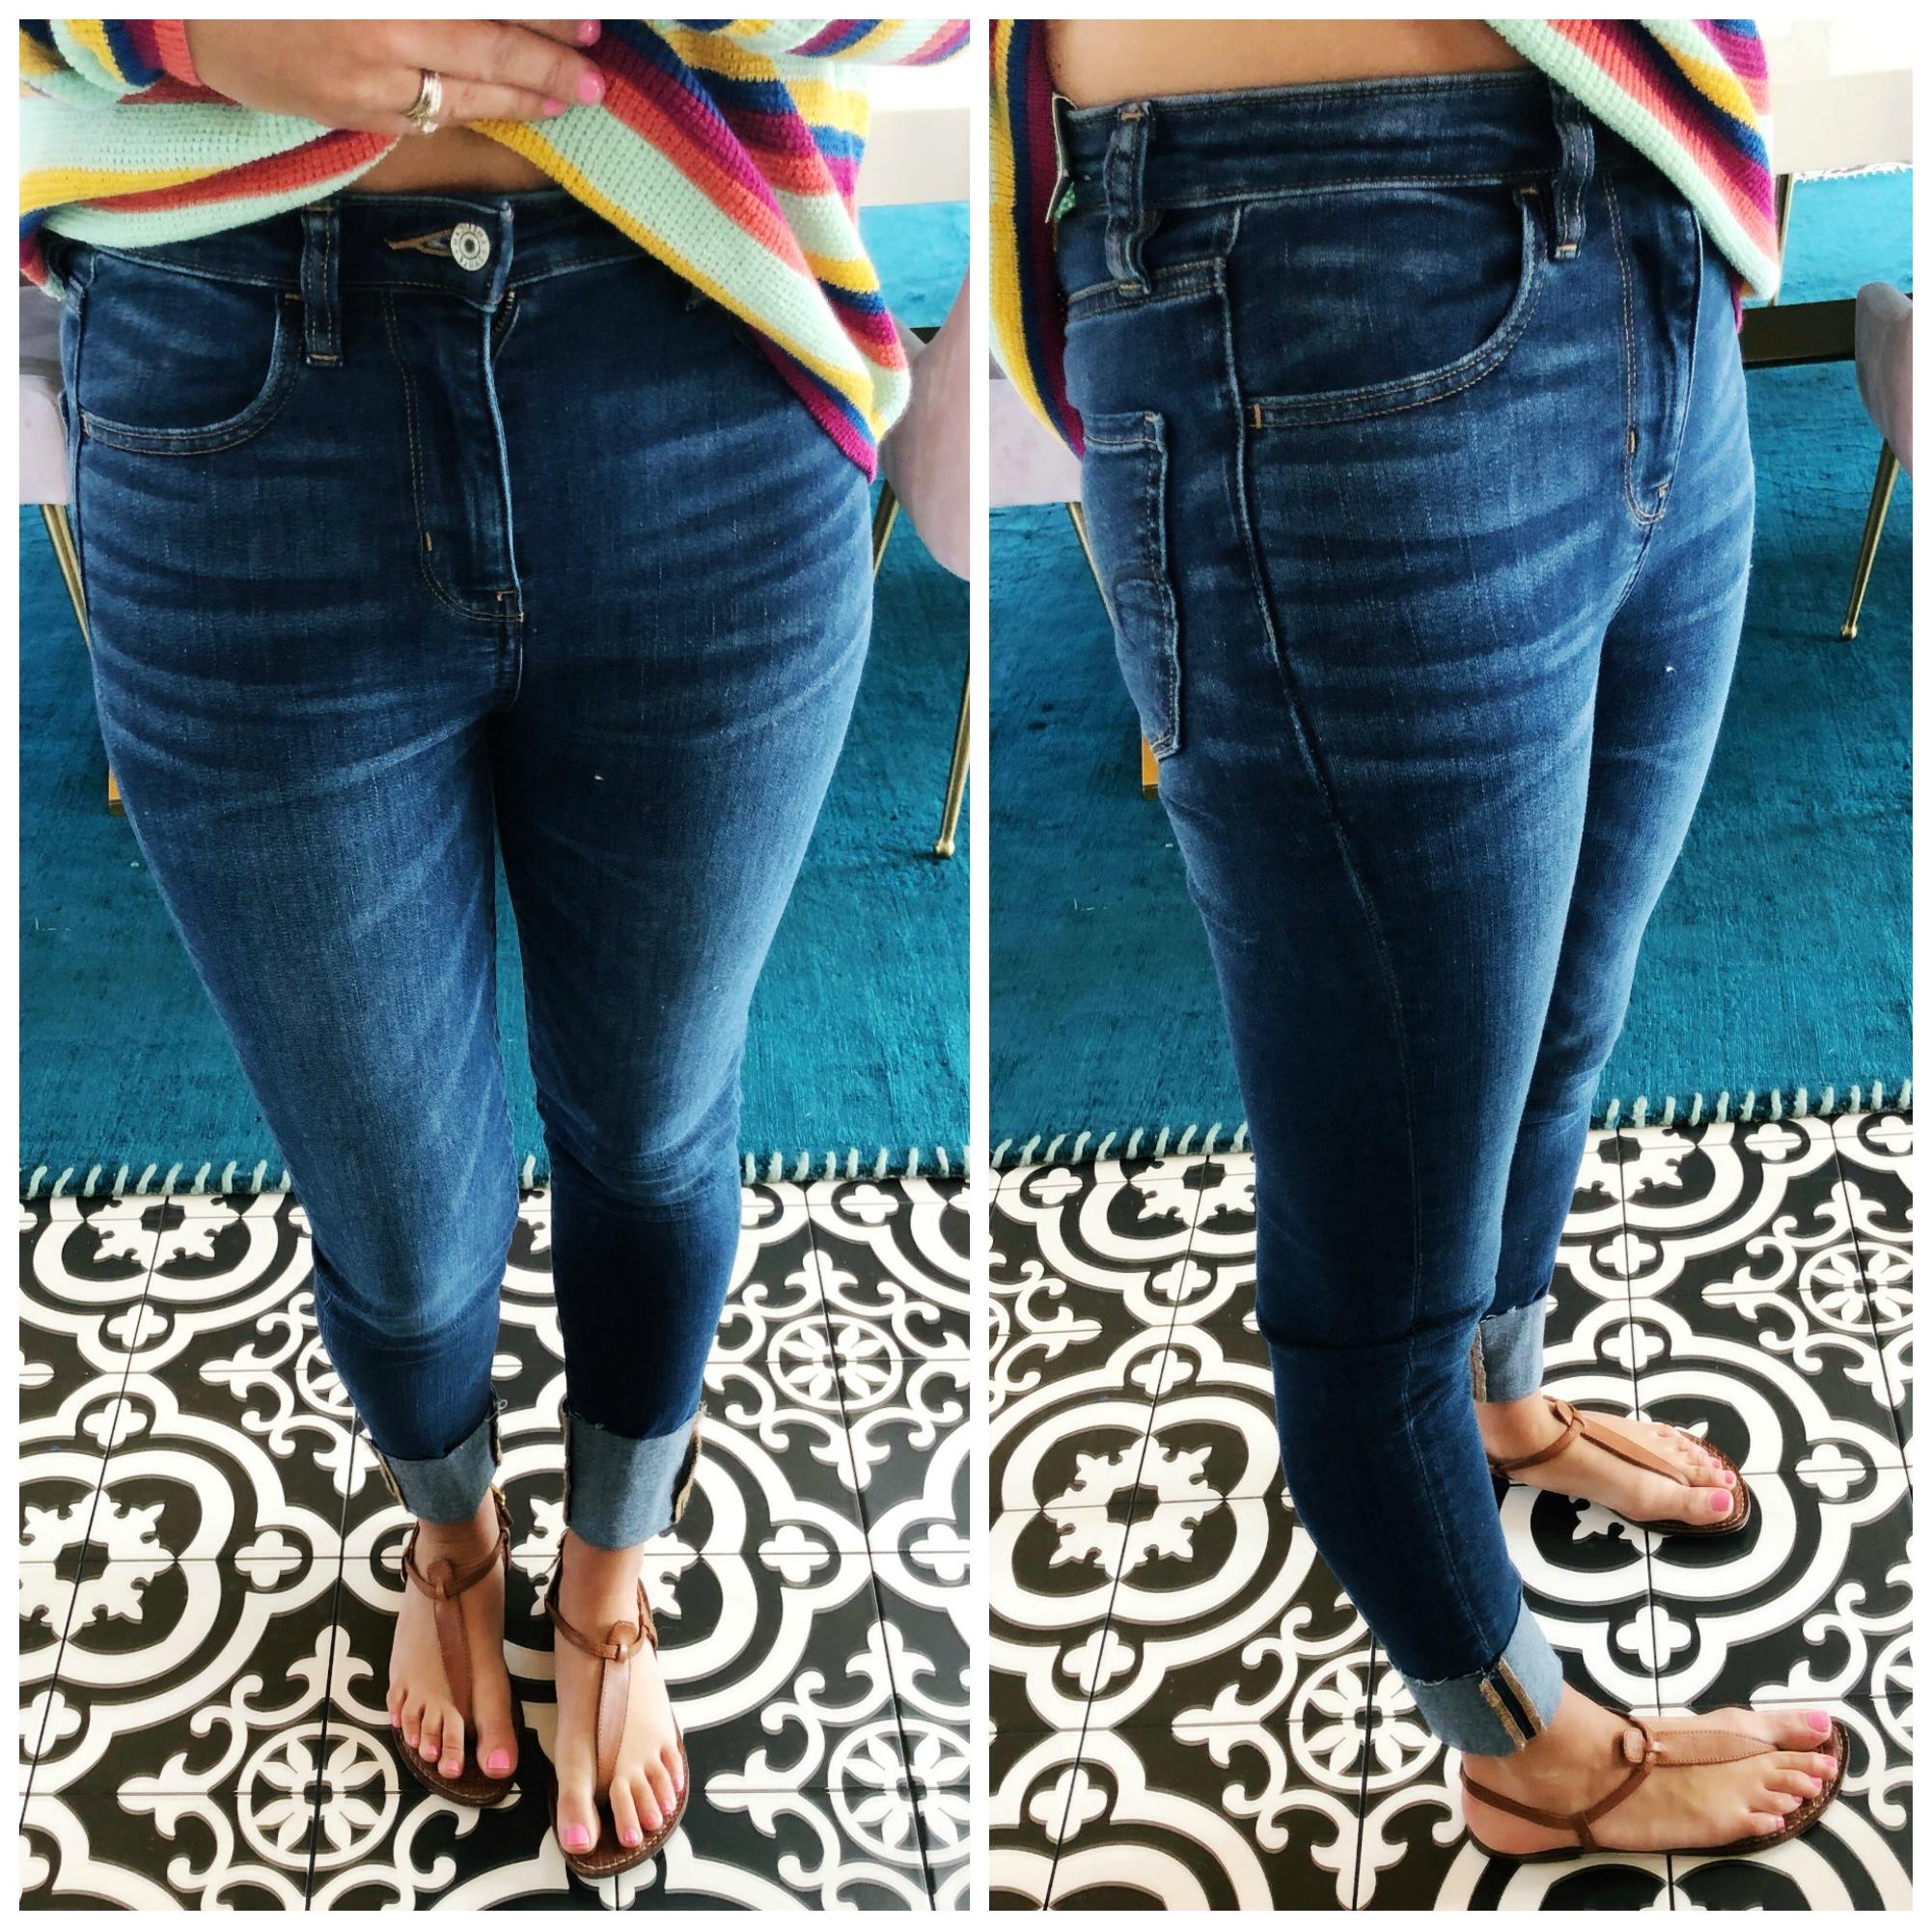 High Waisted Jegging // American Eagle Cropped Jegging // The perfect Spring Jean